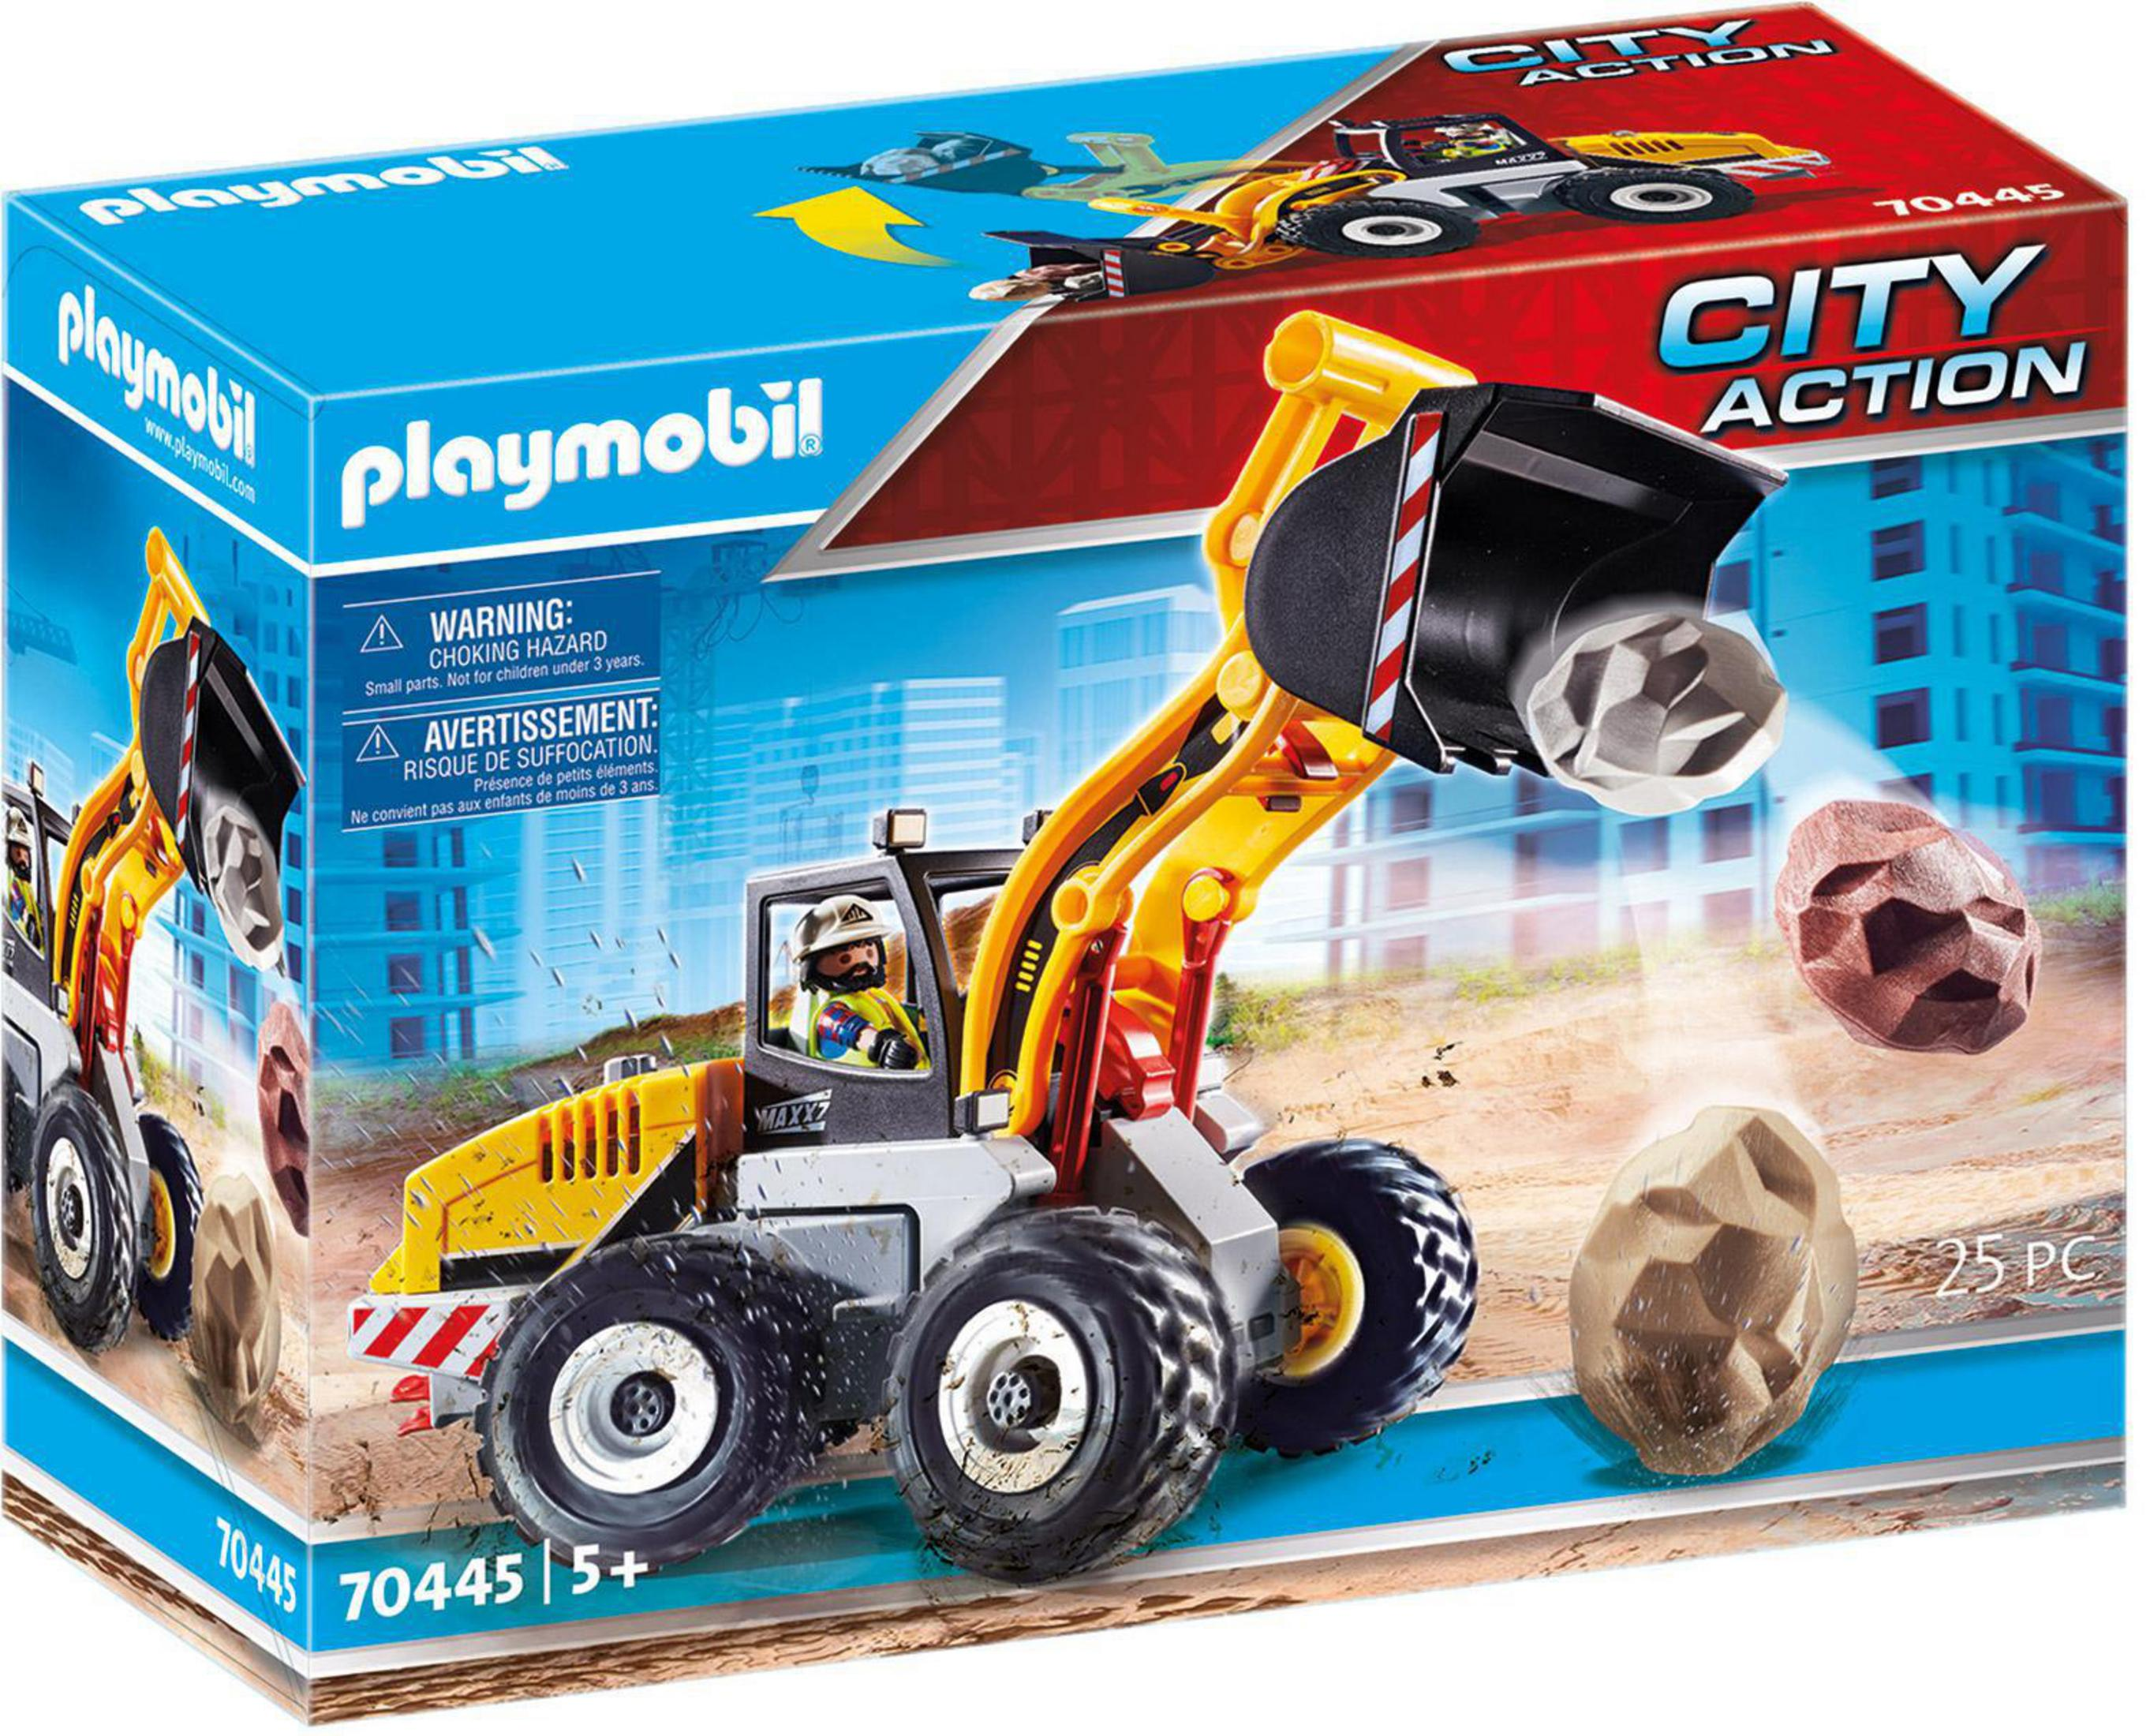 70445 PLAYMOBIL Spielzeugsets